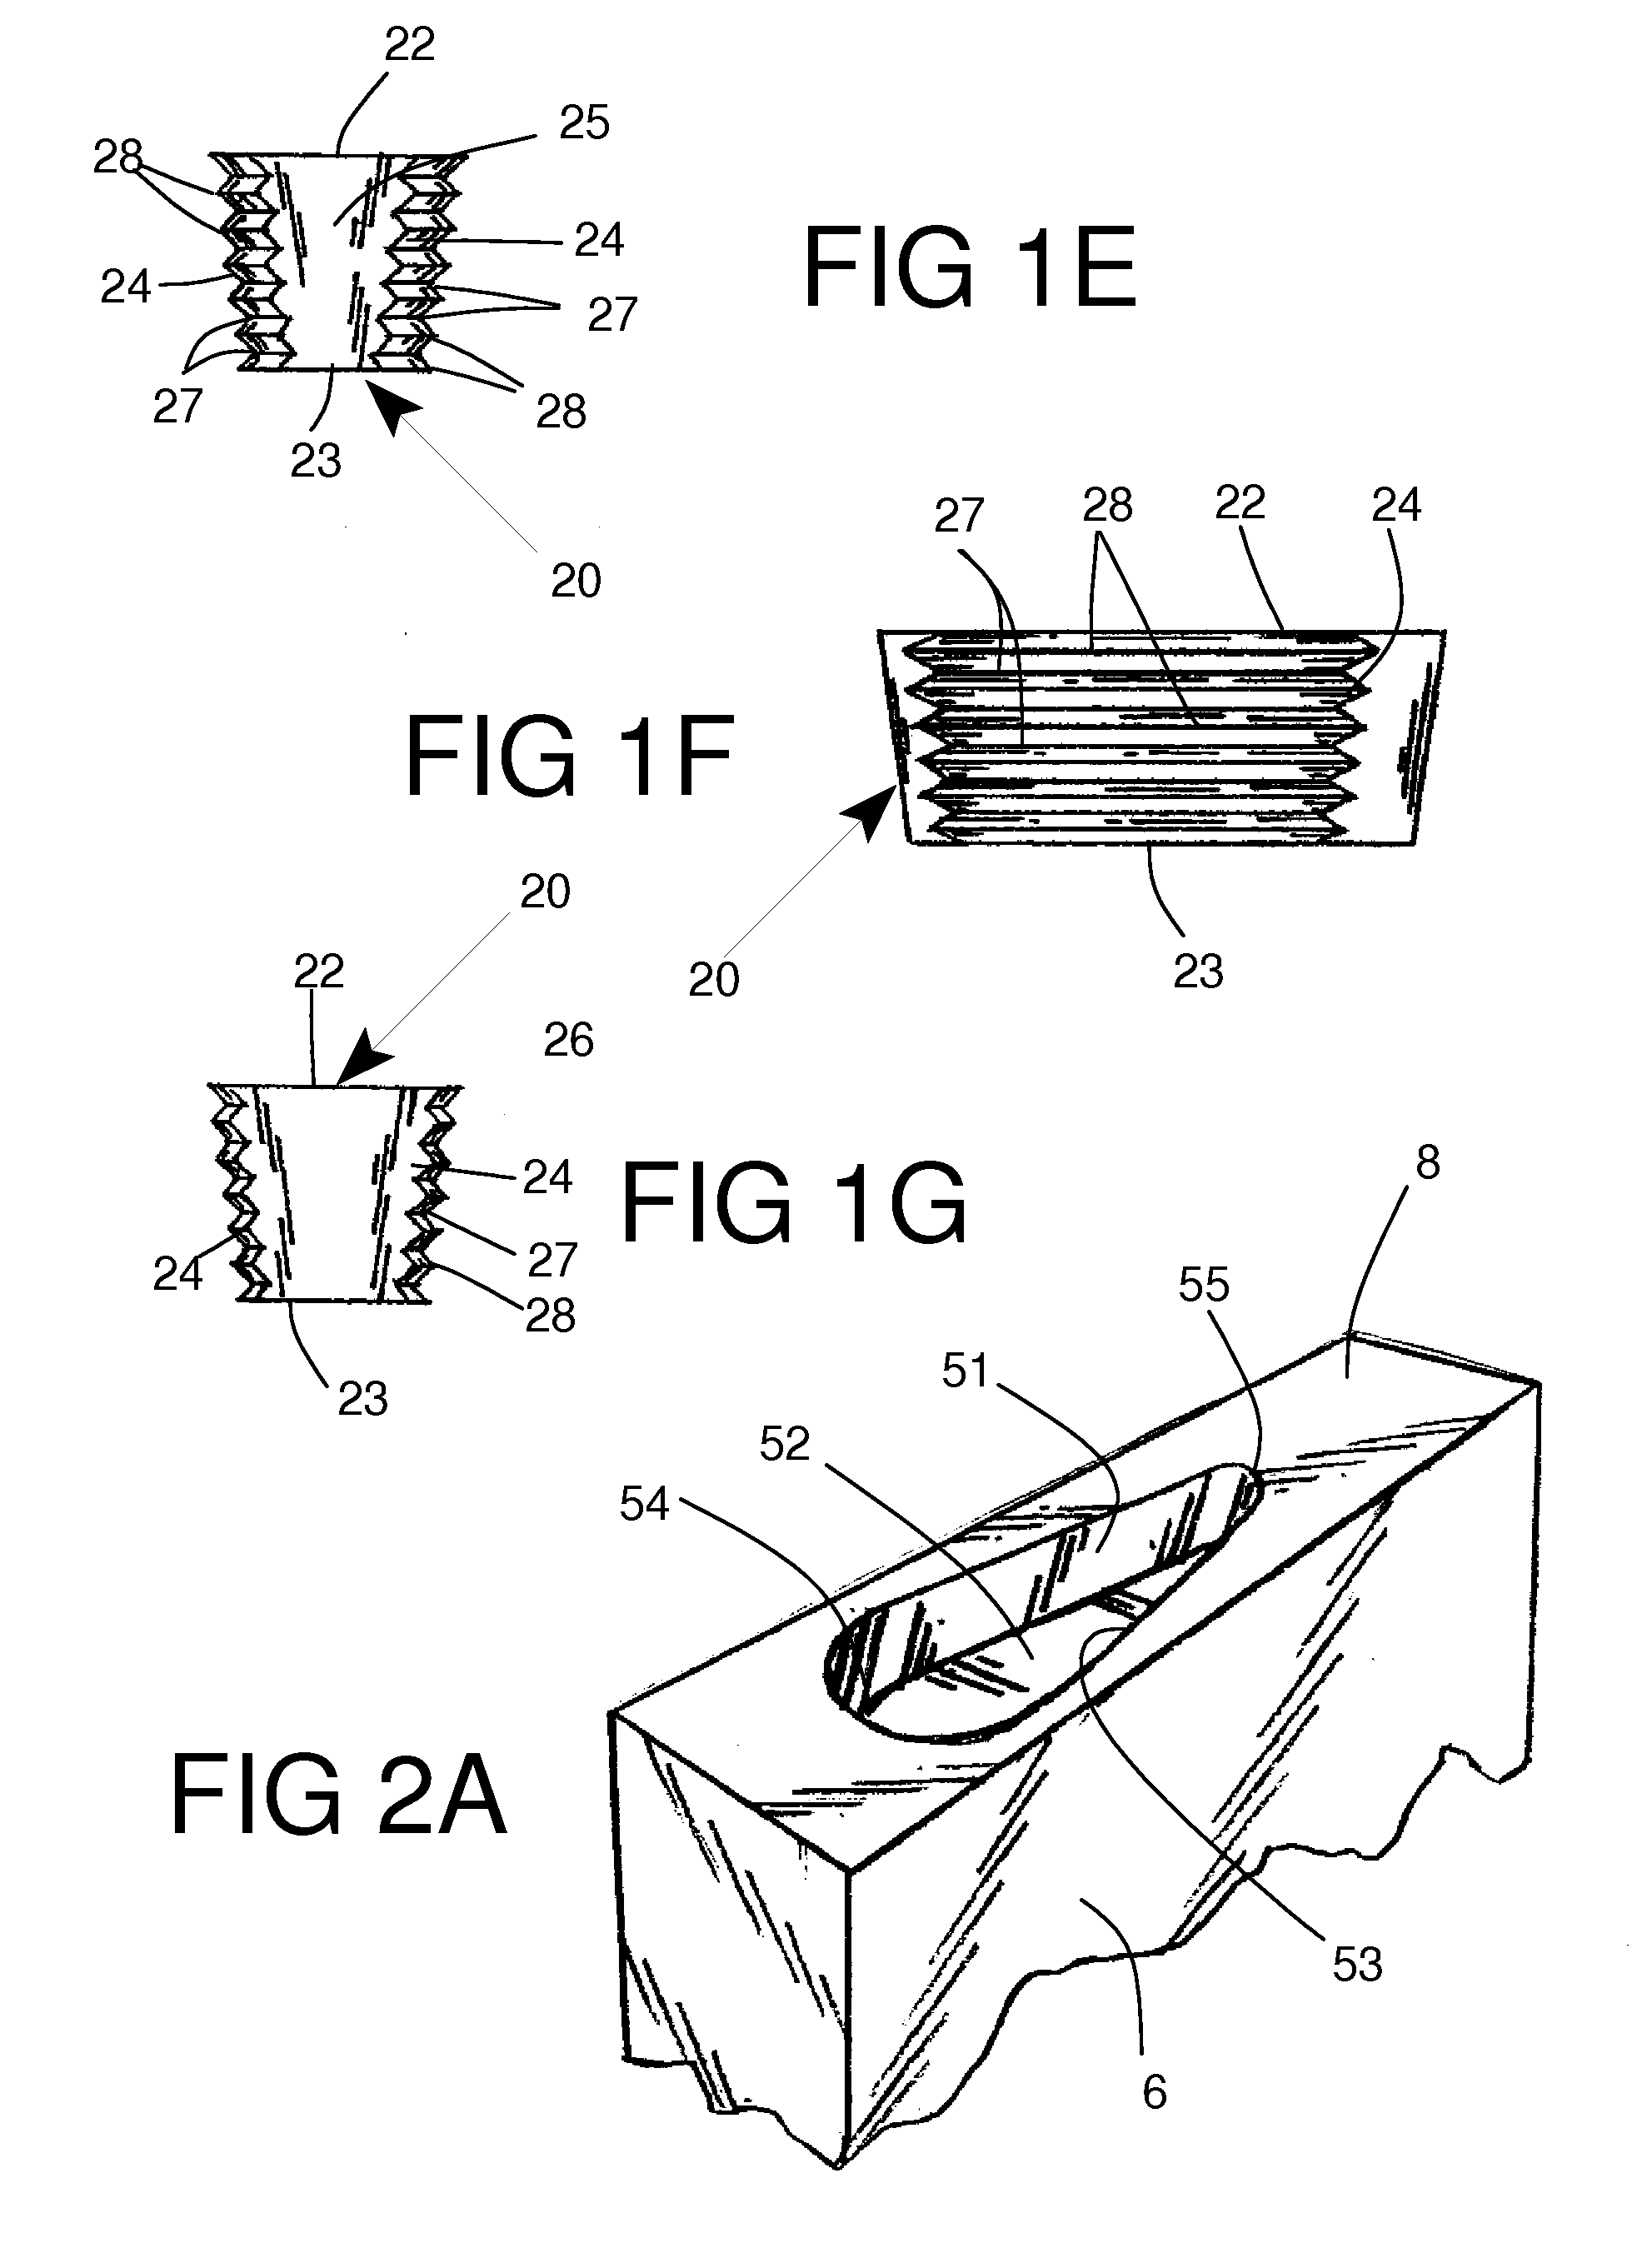 Connector System for Rapid Assembly and Disassembly of Panels and Other Members